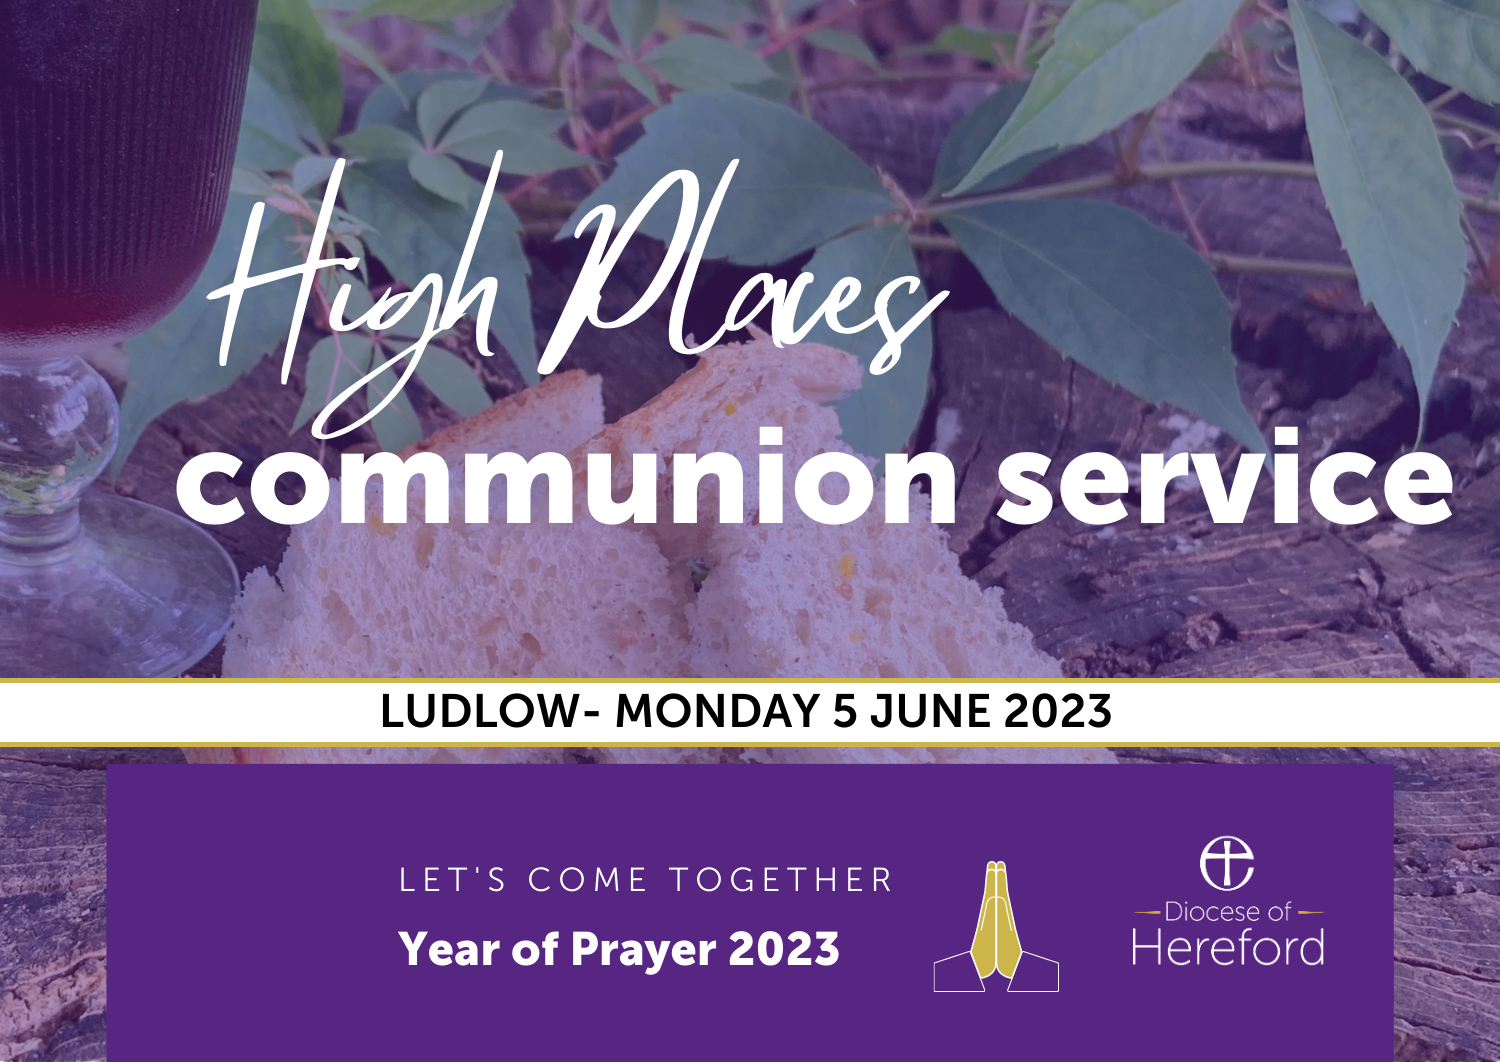 Bread and Wine - Invitation to Holy Commuion Service